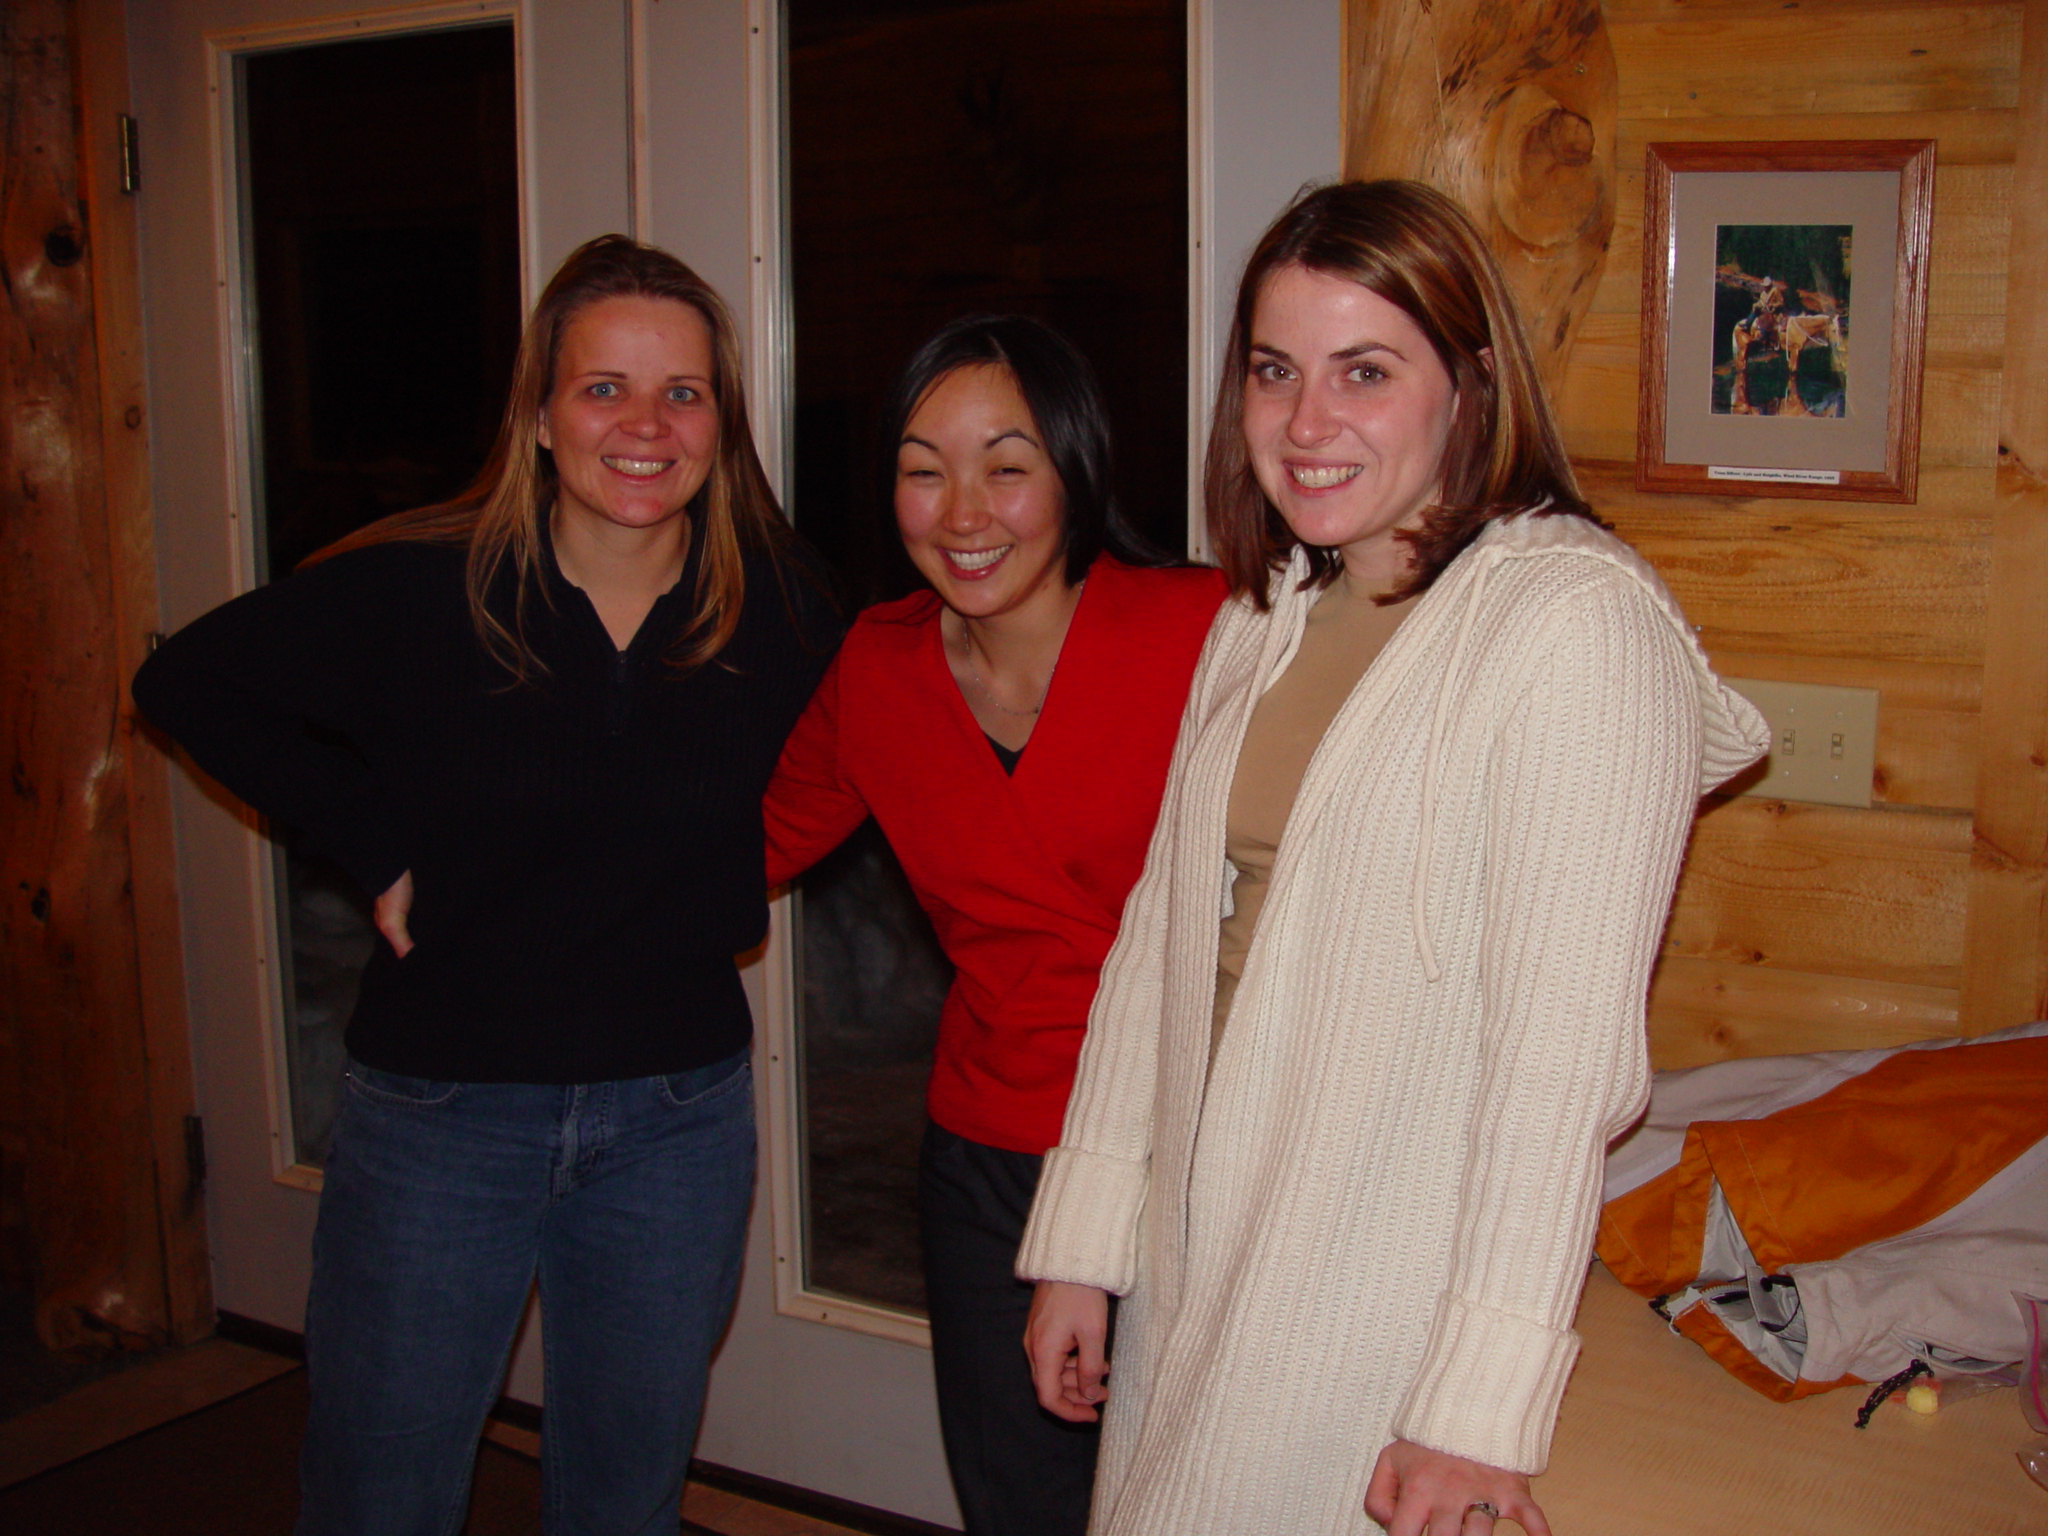 New Year's Eve 2001 (Israelsen Cabin)